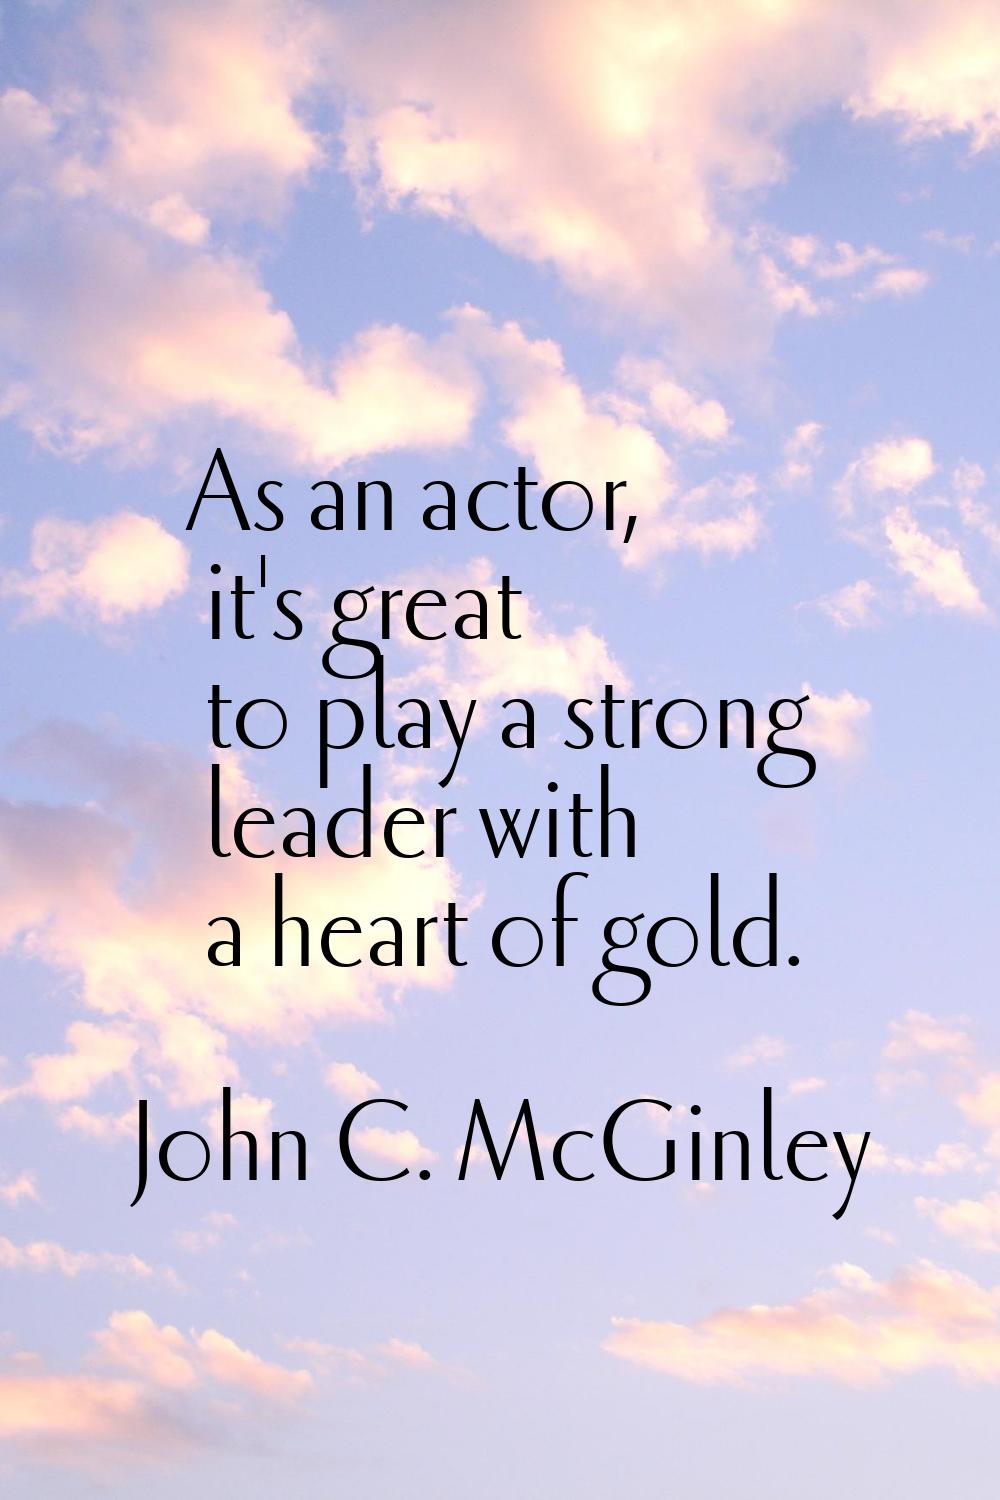 As an actor, it's great to play a strong leader with a heart of gold.